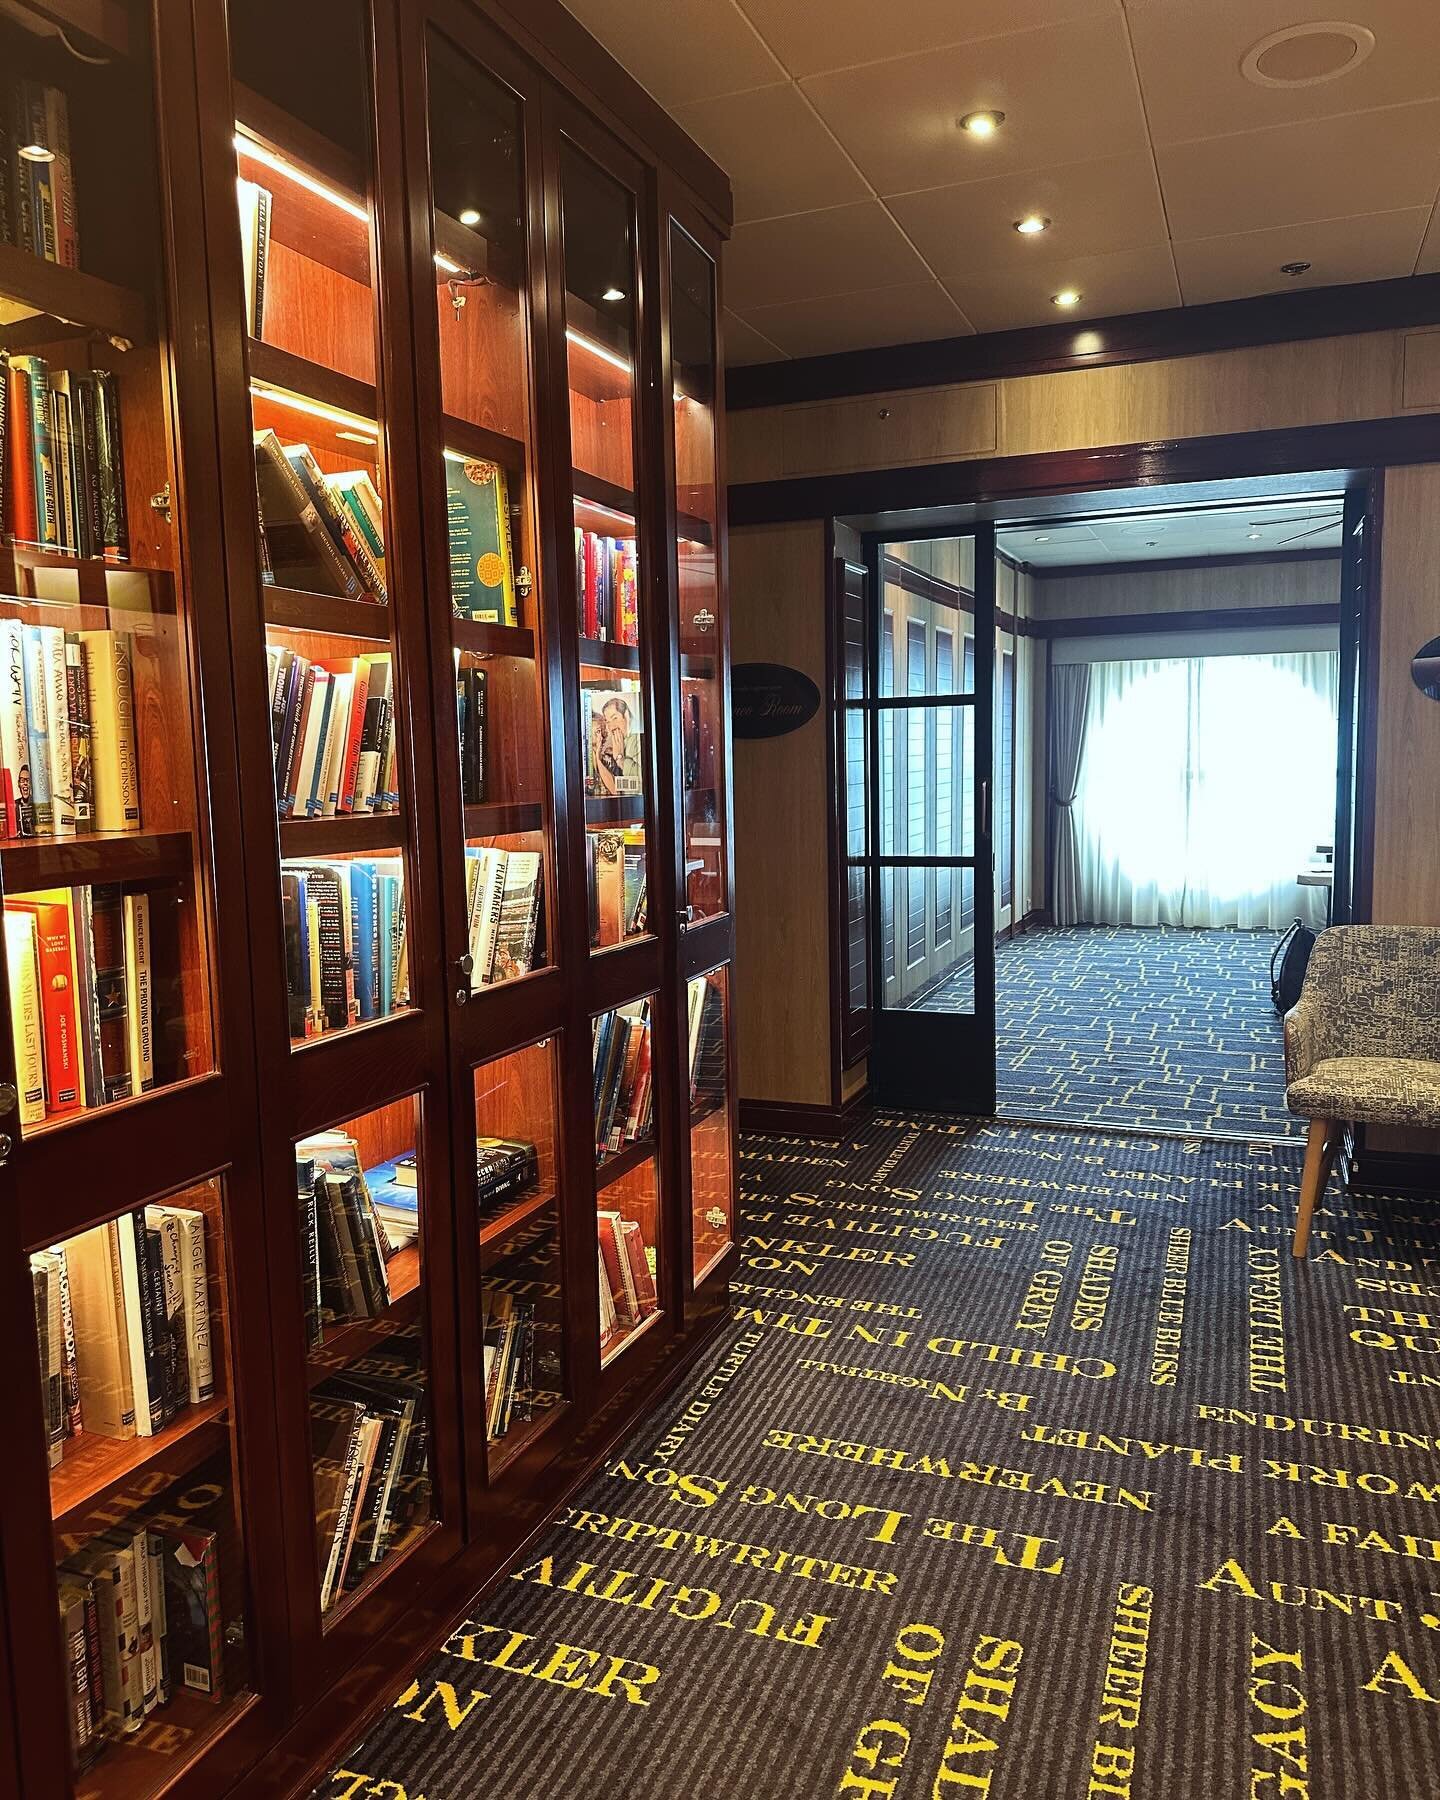 I love that this cruise ship (The Norwegian Sun) has a library. (I actually posted about it before because we took this same boat last year for our transatlantic cruise.) 

To be honest, between seeing the sights of central and south America and tryi